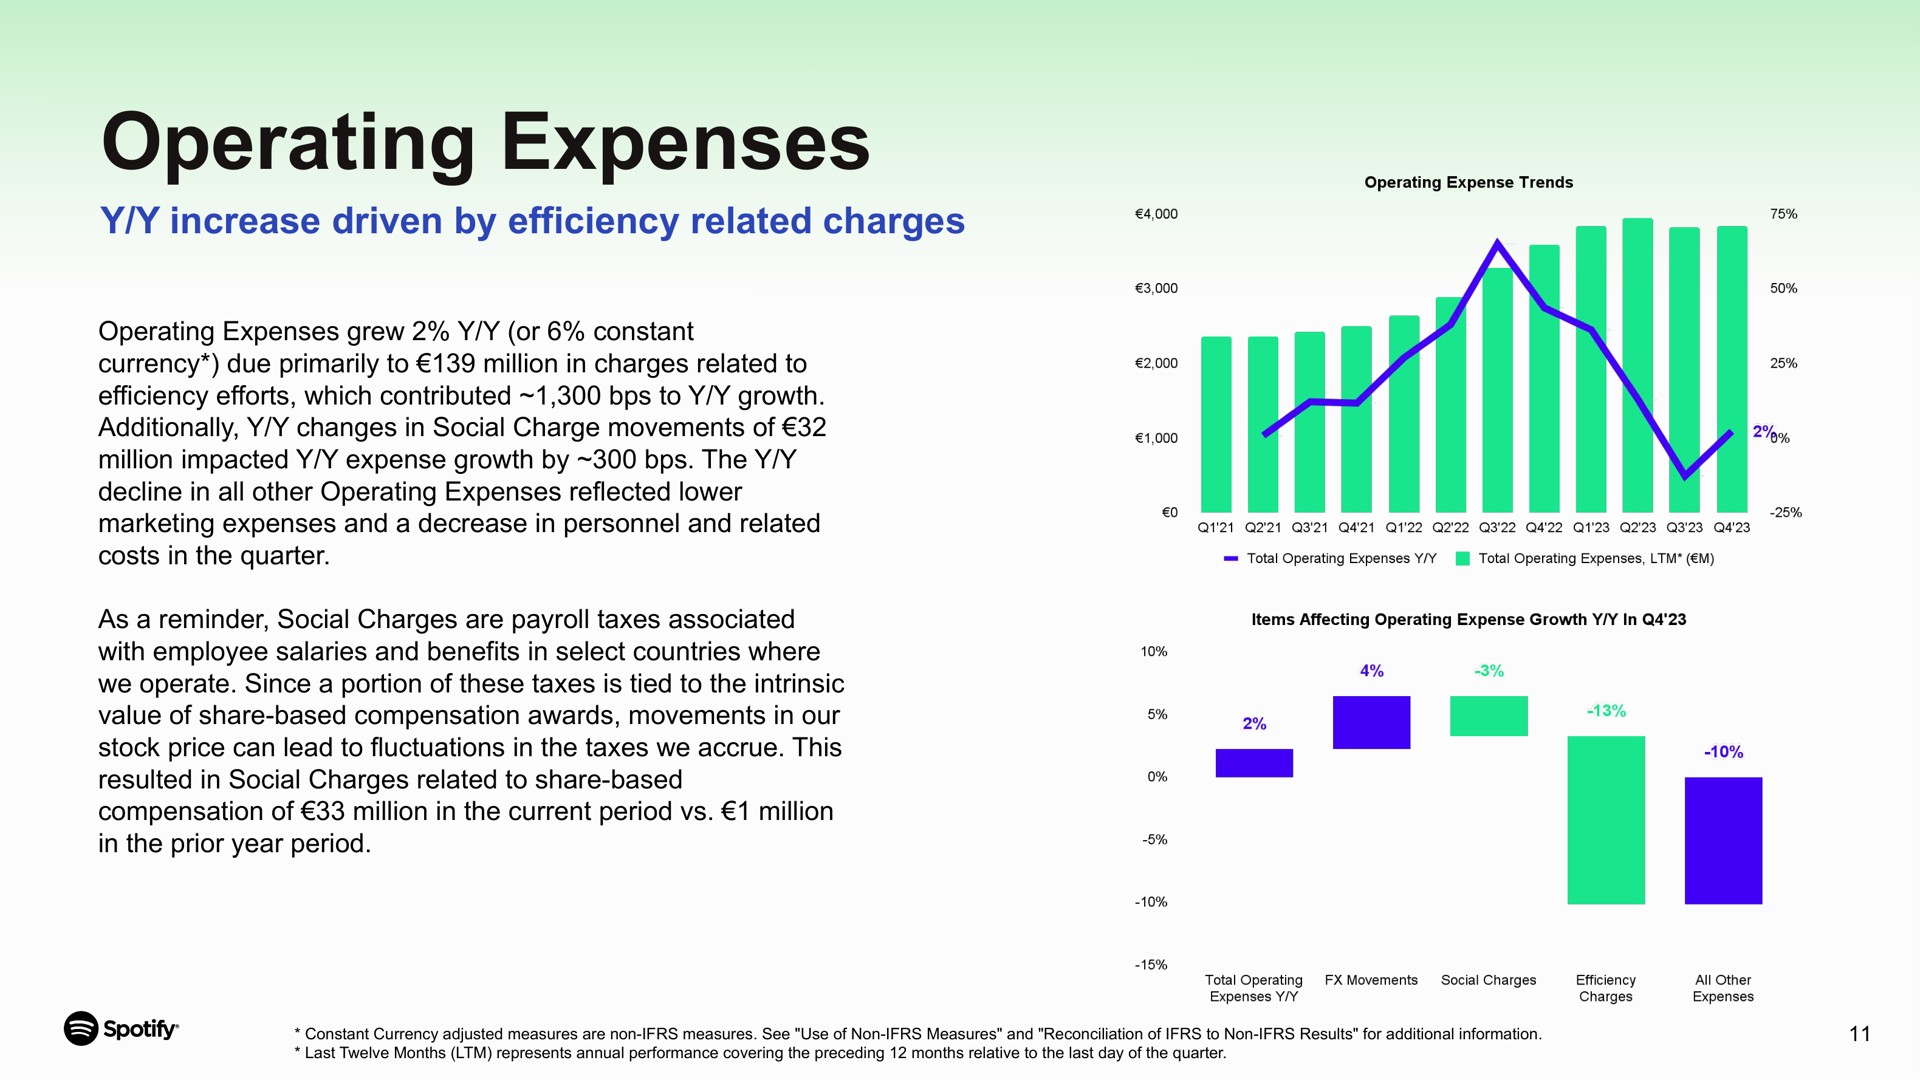 operating expenses increase driven by efficiency related charges grew or constant currency due primarily to million in to efforts which contributed to growth additionally changes in social charge movements of million impacted expense growth the decline in all other reflected lower as a reminder social are payroll taxes associated with employee salaries and benefits in select countries where we operate since a portion of these taxes is tied to the intrinsic value of share based compensation awards movements in our stock price can lead to fluctuations in the taxes we accrue this resulted in social to share based compensation of million in the current period million in the prior year period an items affecting expense growth in i a | Spotify